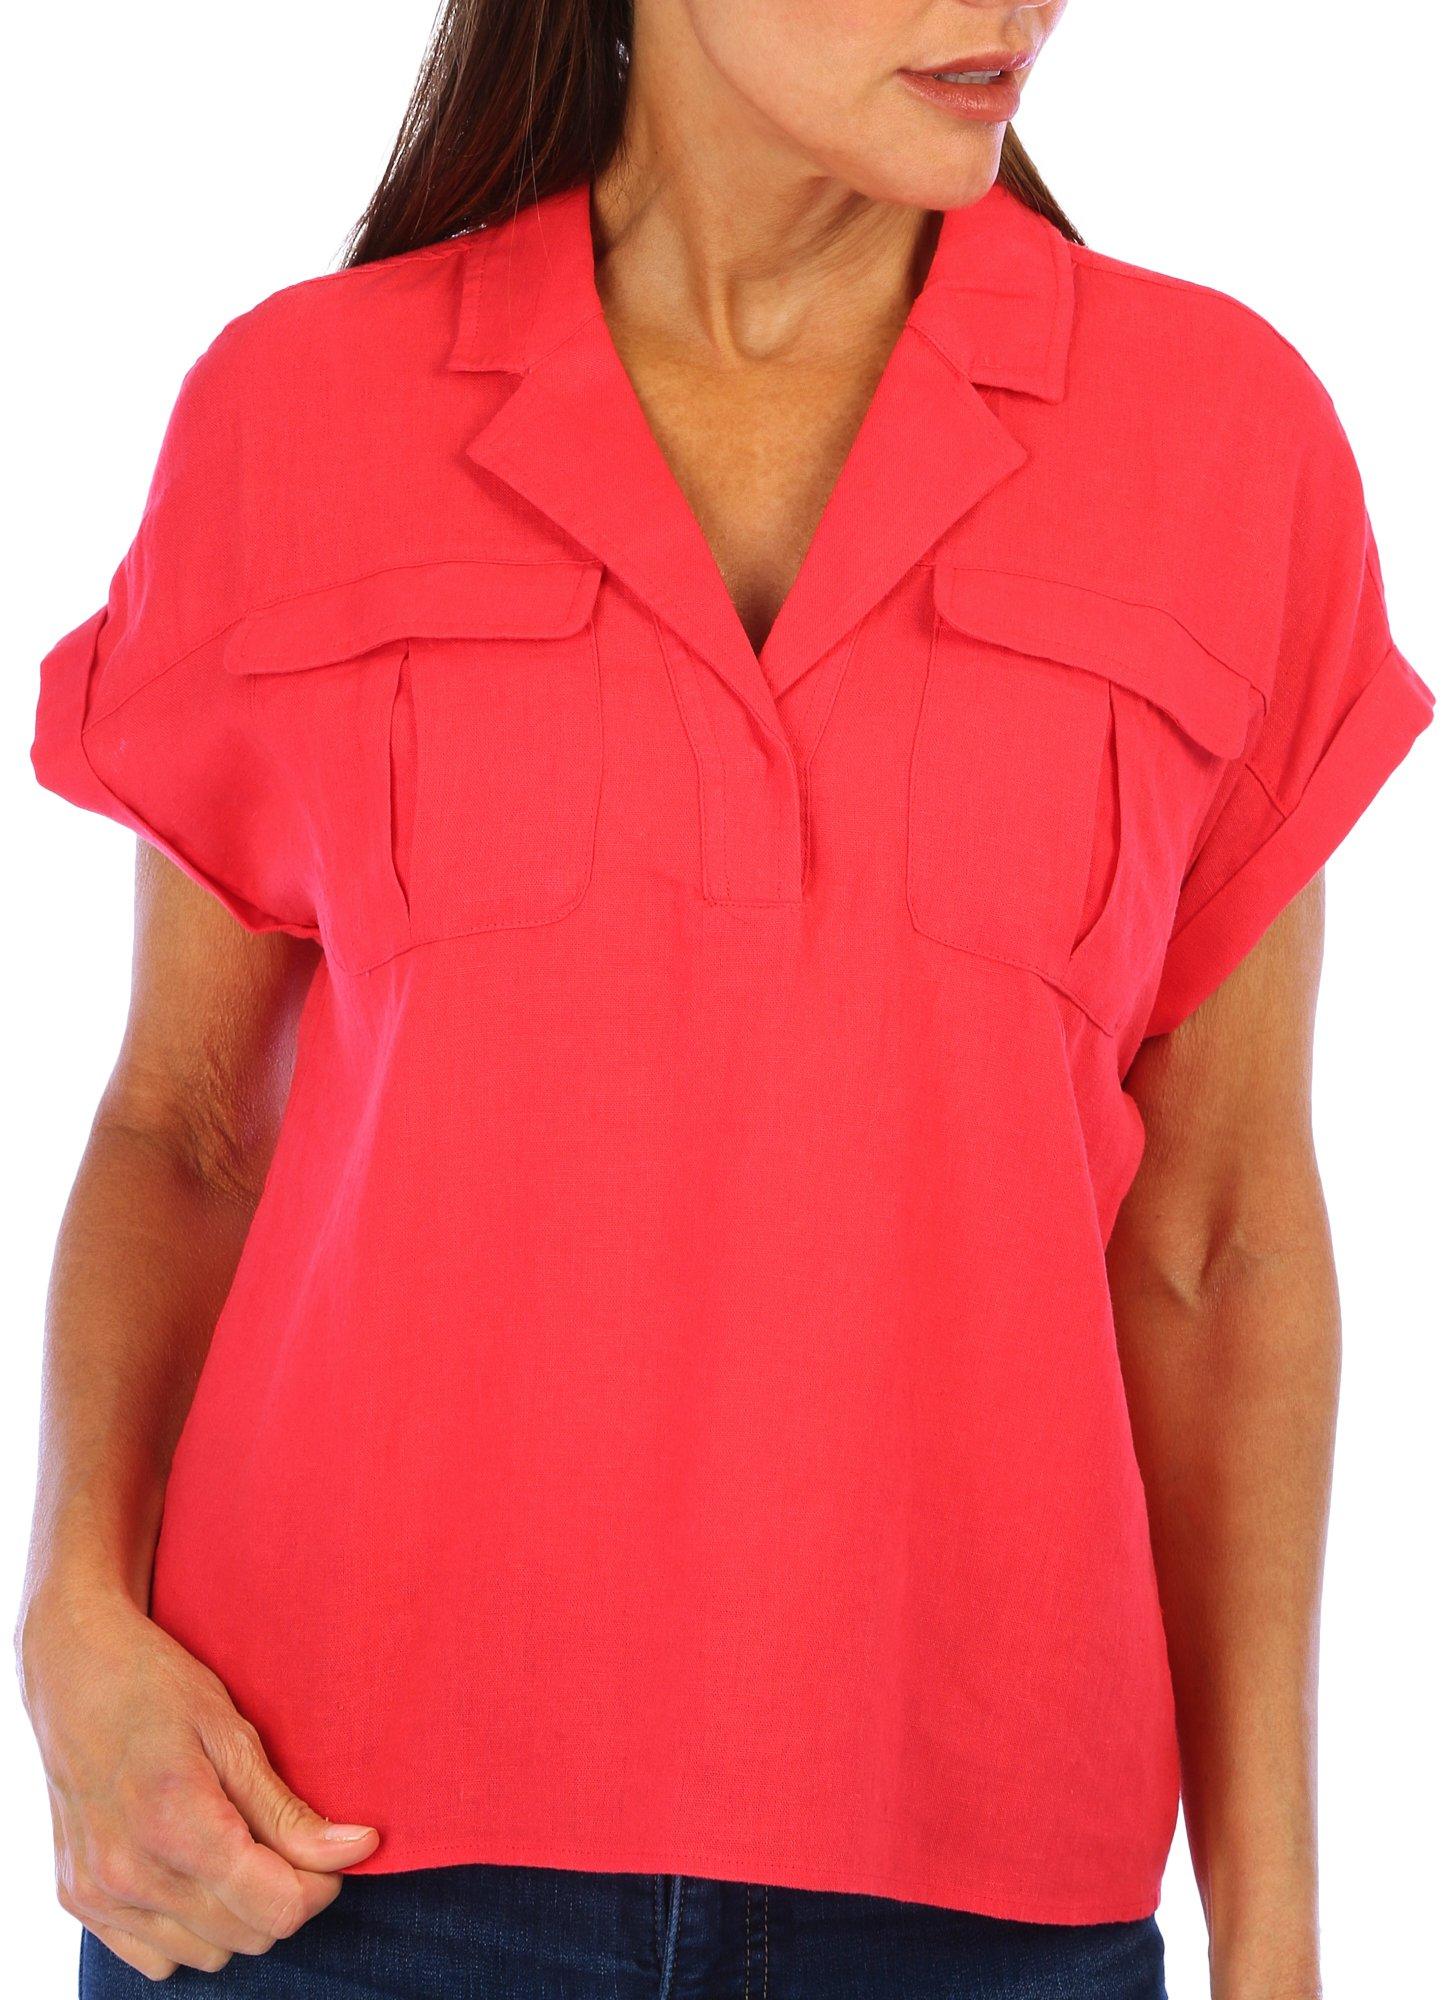 Womens Solid Collared Shirt